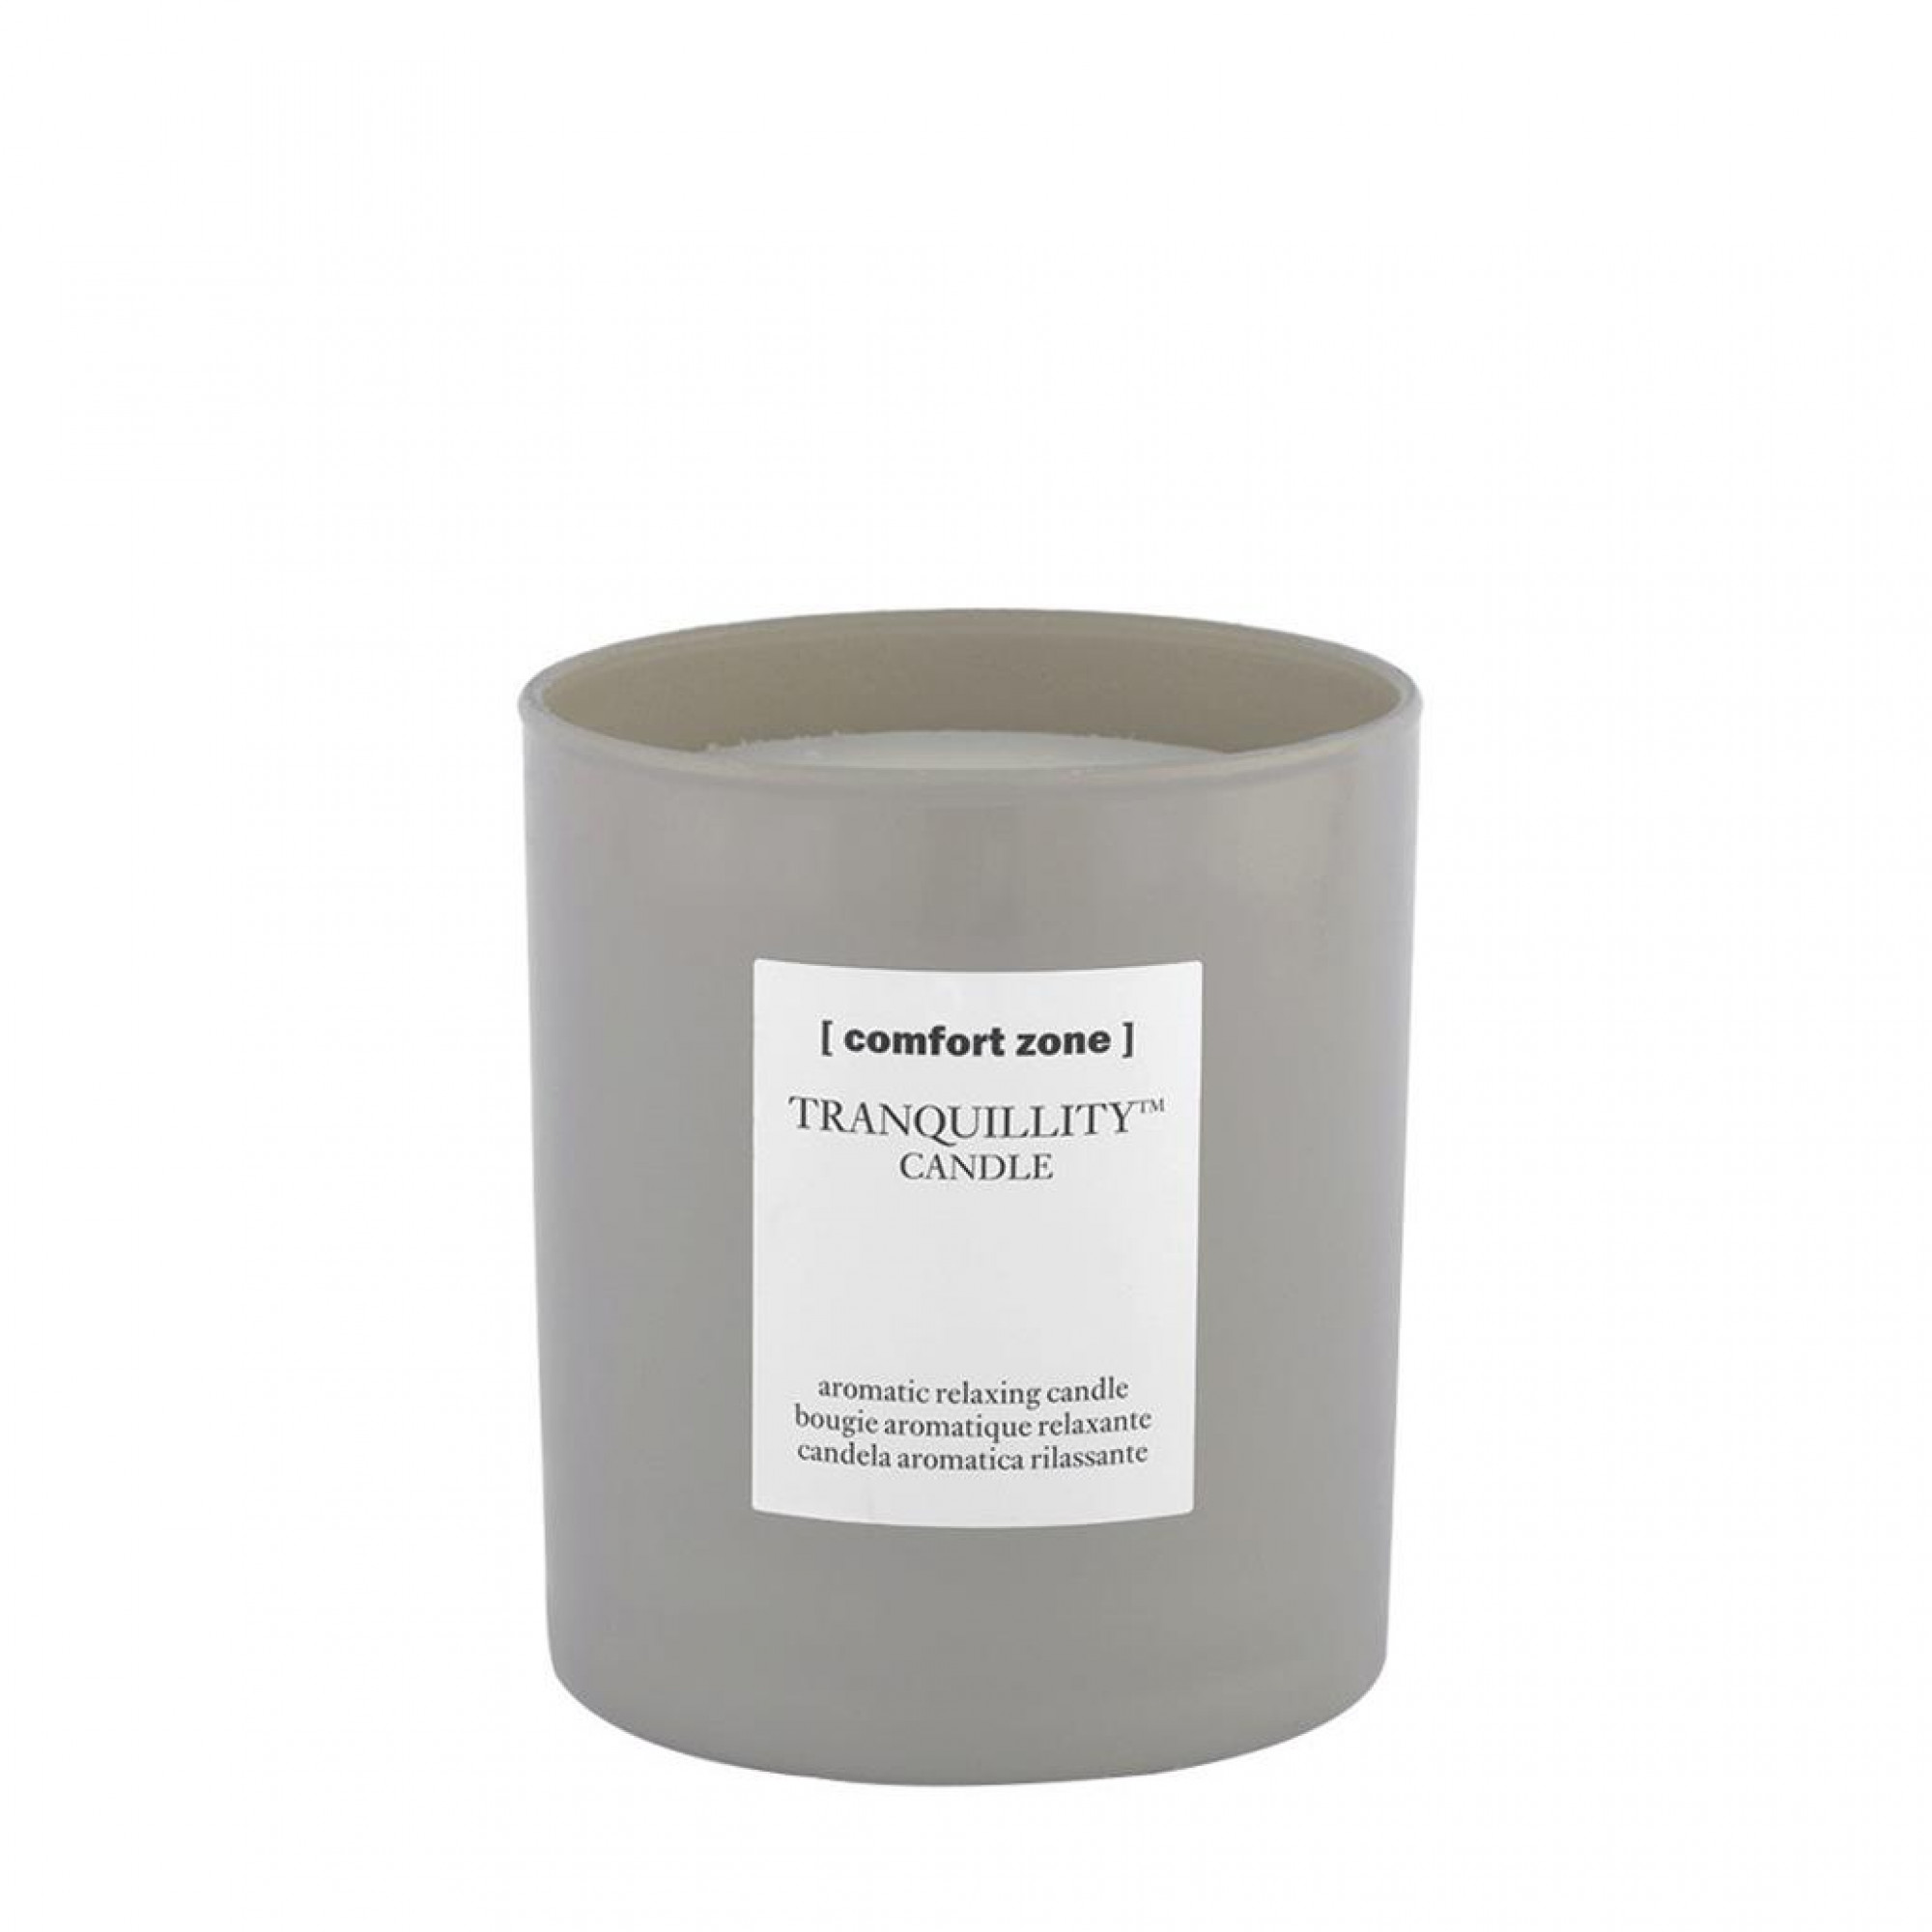 Tranquillity Candle 280 gr - Comfort zone - Offerta 40,00 €